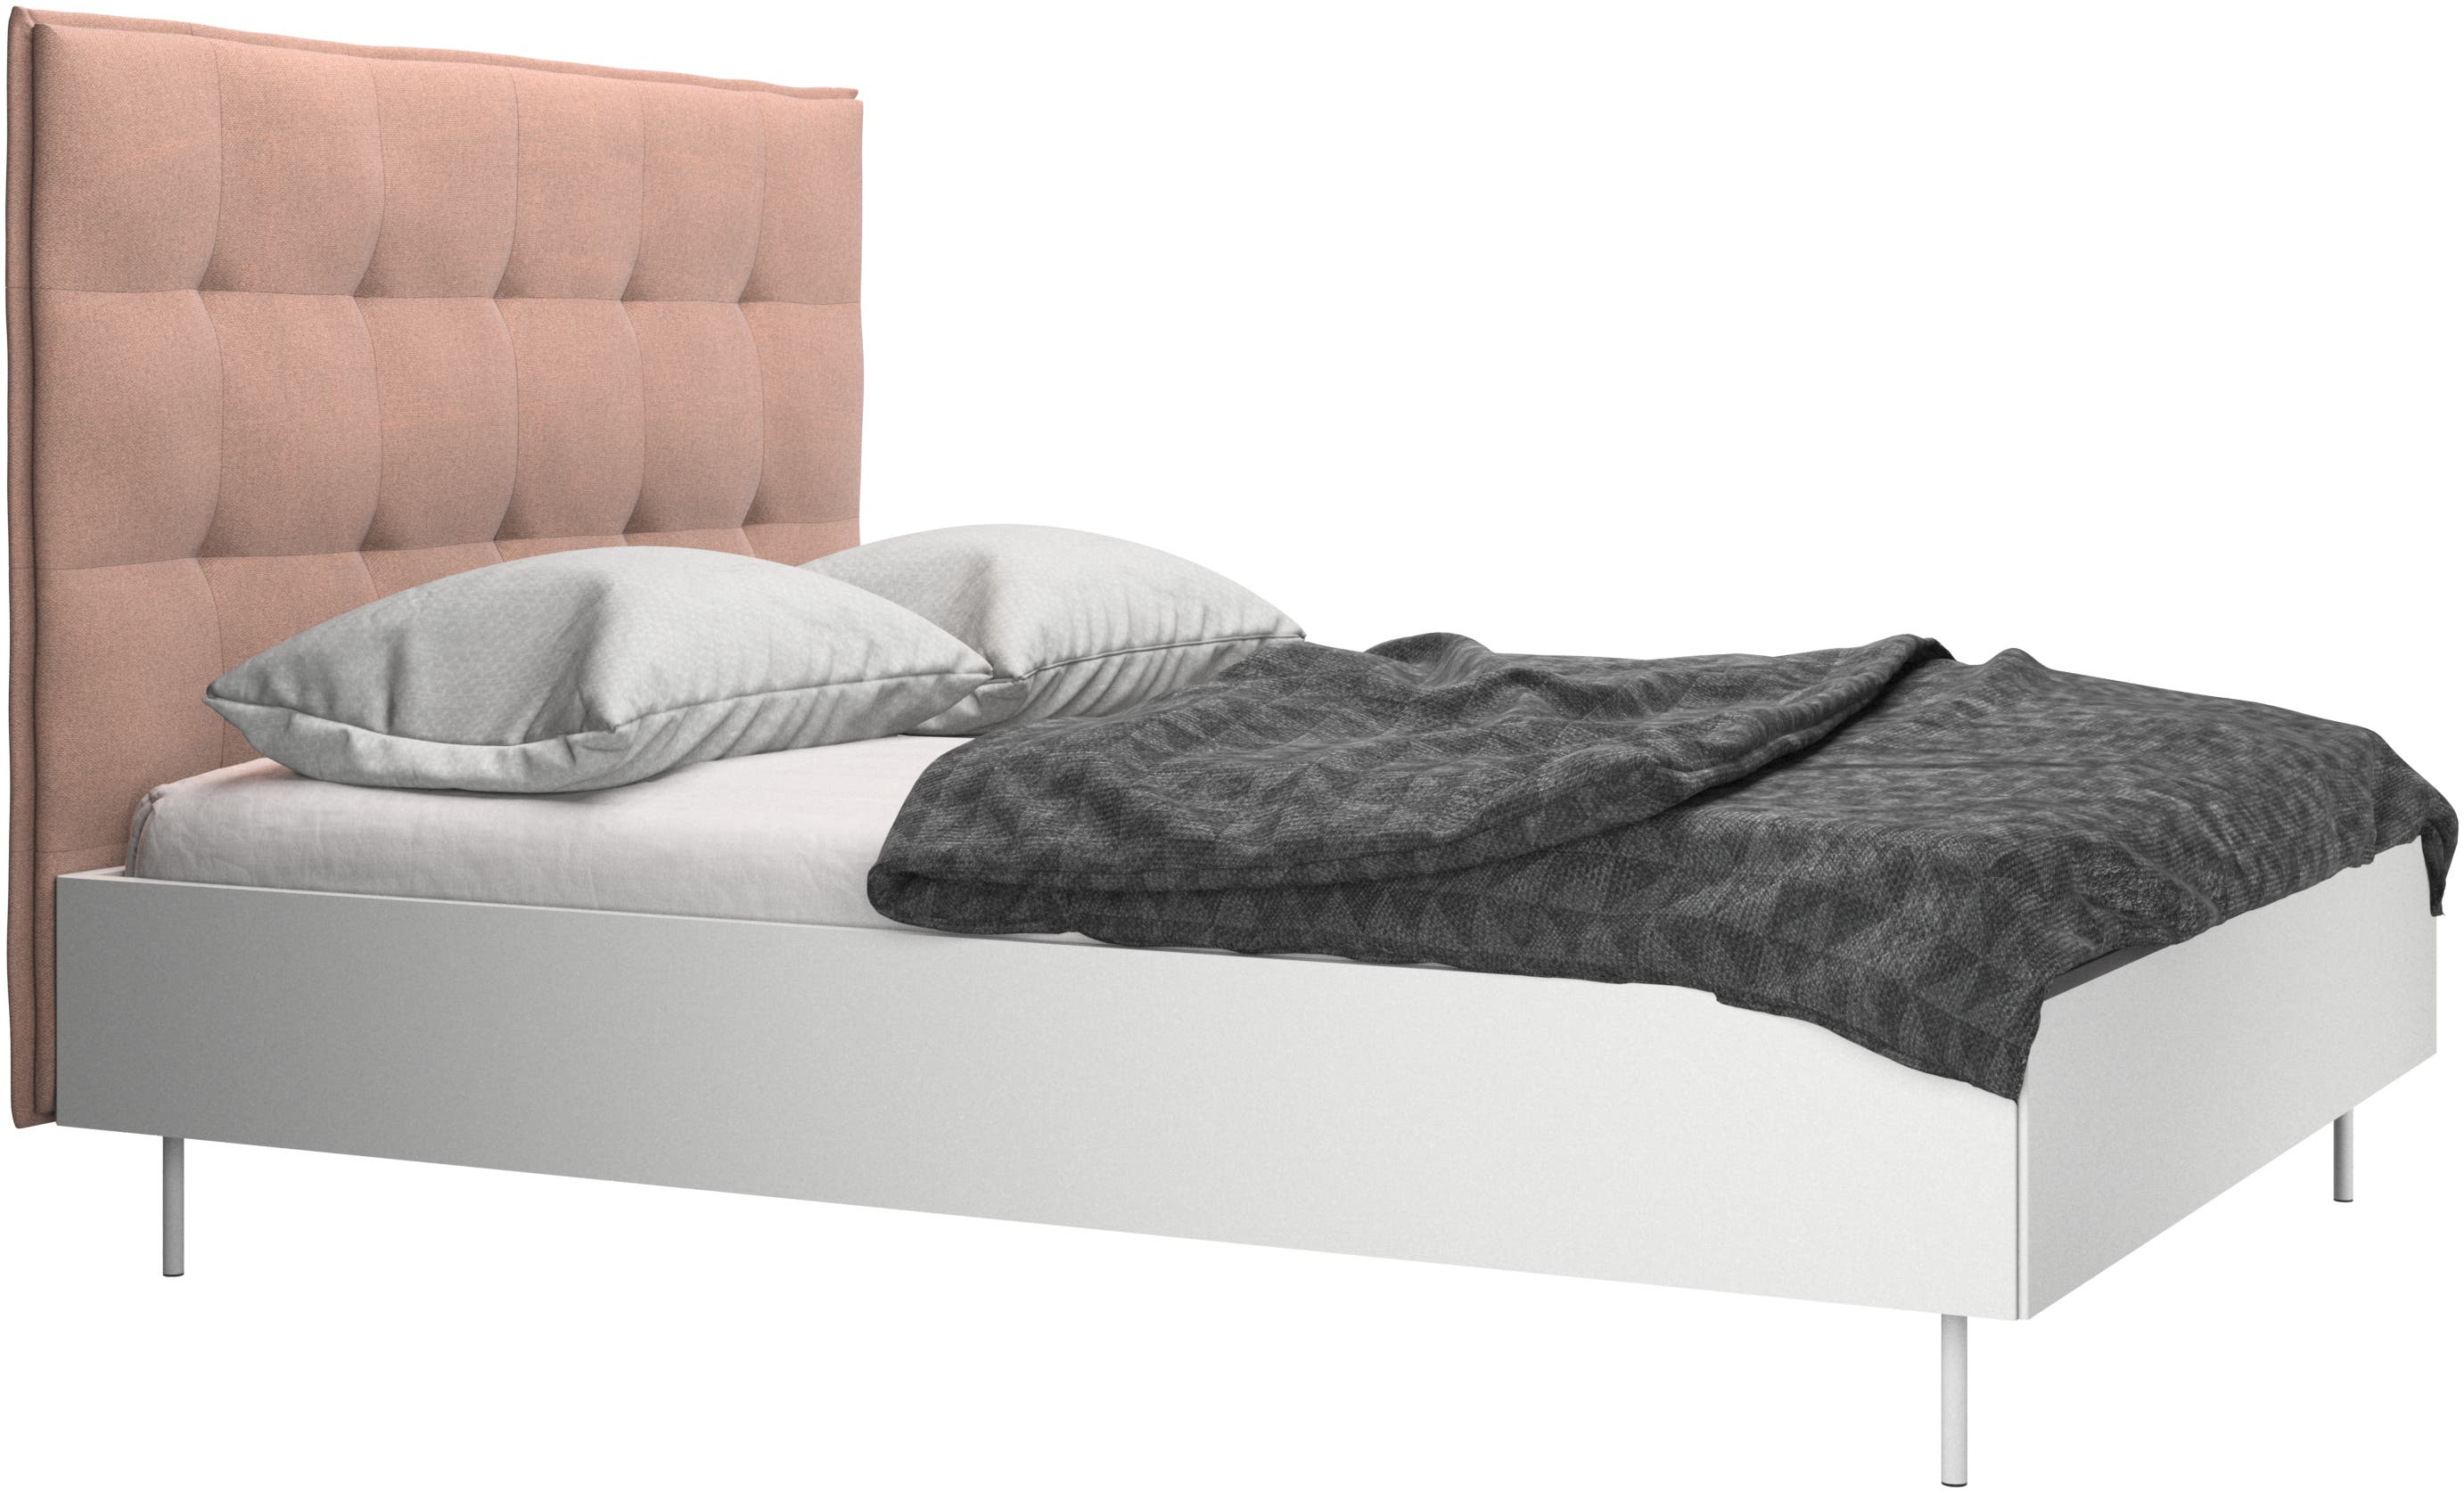 Lugano bed, excl. mattress